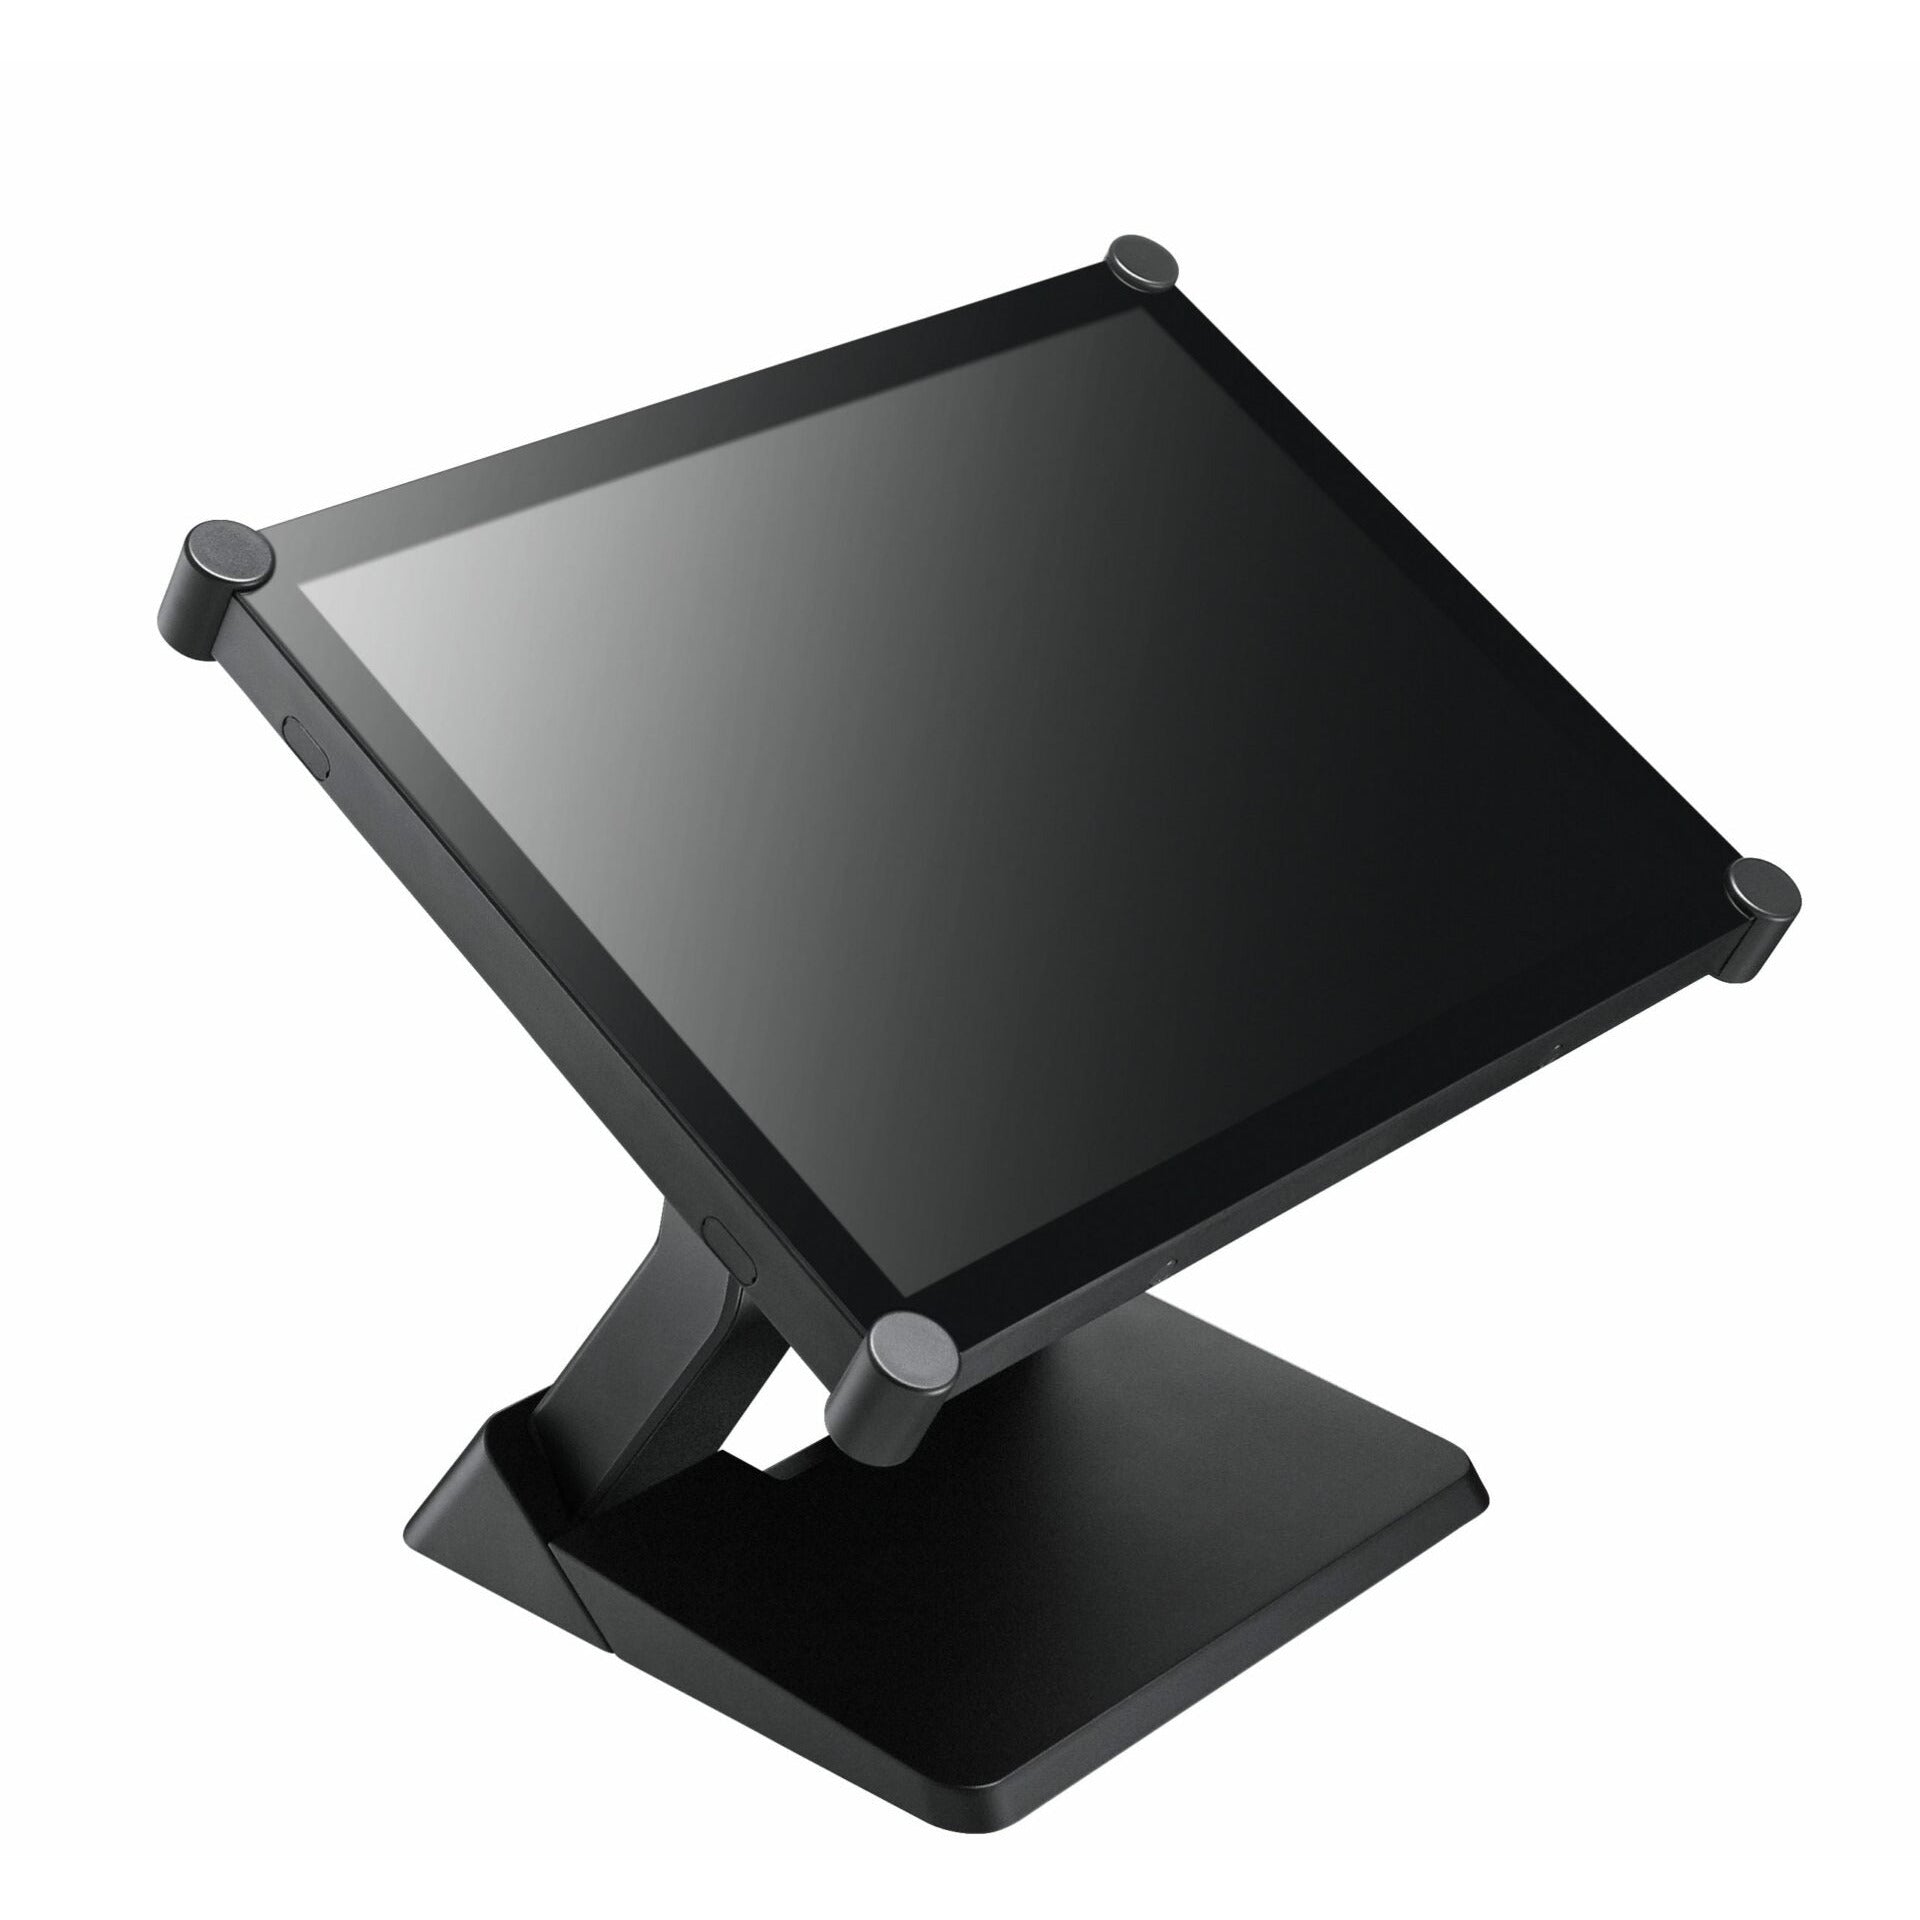 AG Neovo TX-1502 15-Inch Touch Screen Monitor With Metal Casing